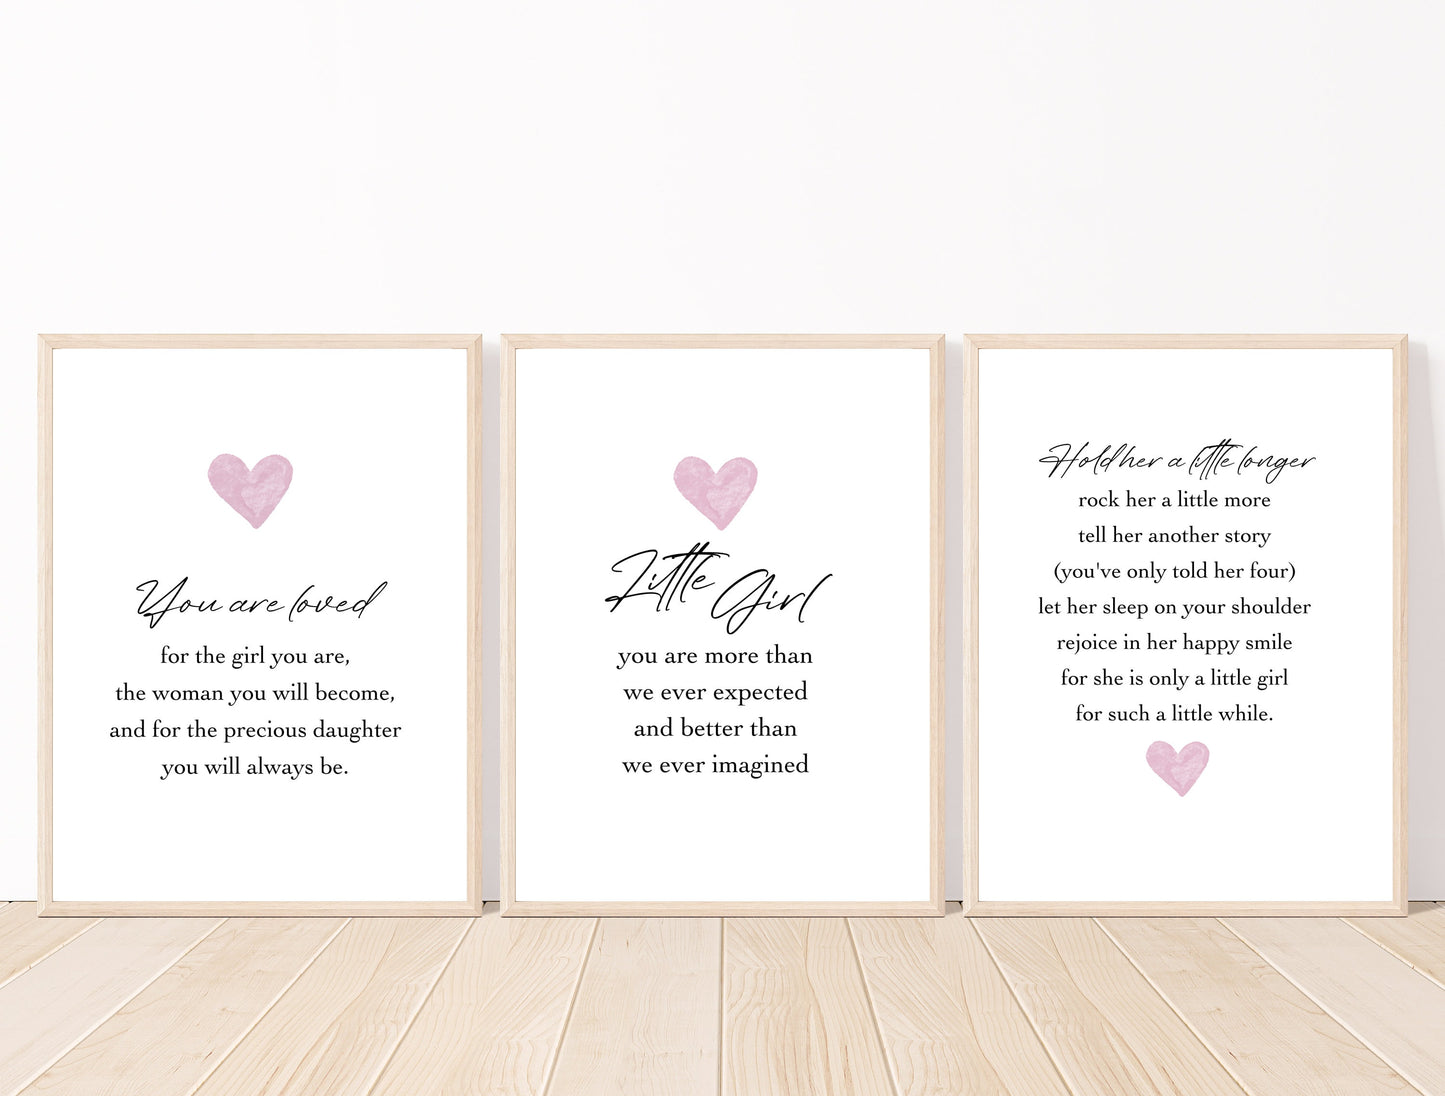 An image showing three digital graphics. The first one has a pink heart and a writing below it that says: You are loved, for the girl you are, the woman you will become, and for the precious daughter you will always be. The second one also has a pink heart with a piece of writing below that says: Little girl, you are more than we ever expected, and better than we ever imagined. The last one displays a piece of writing right above the pink heart. 